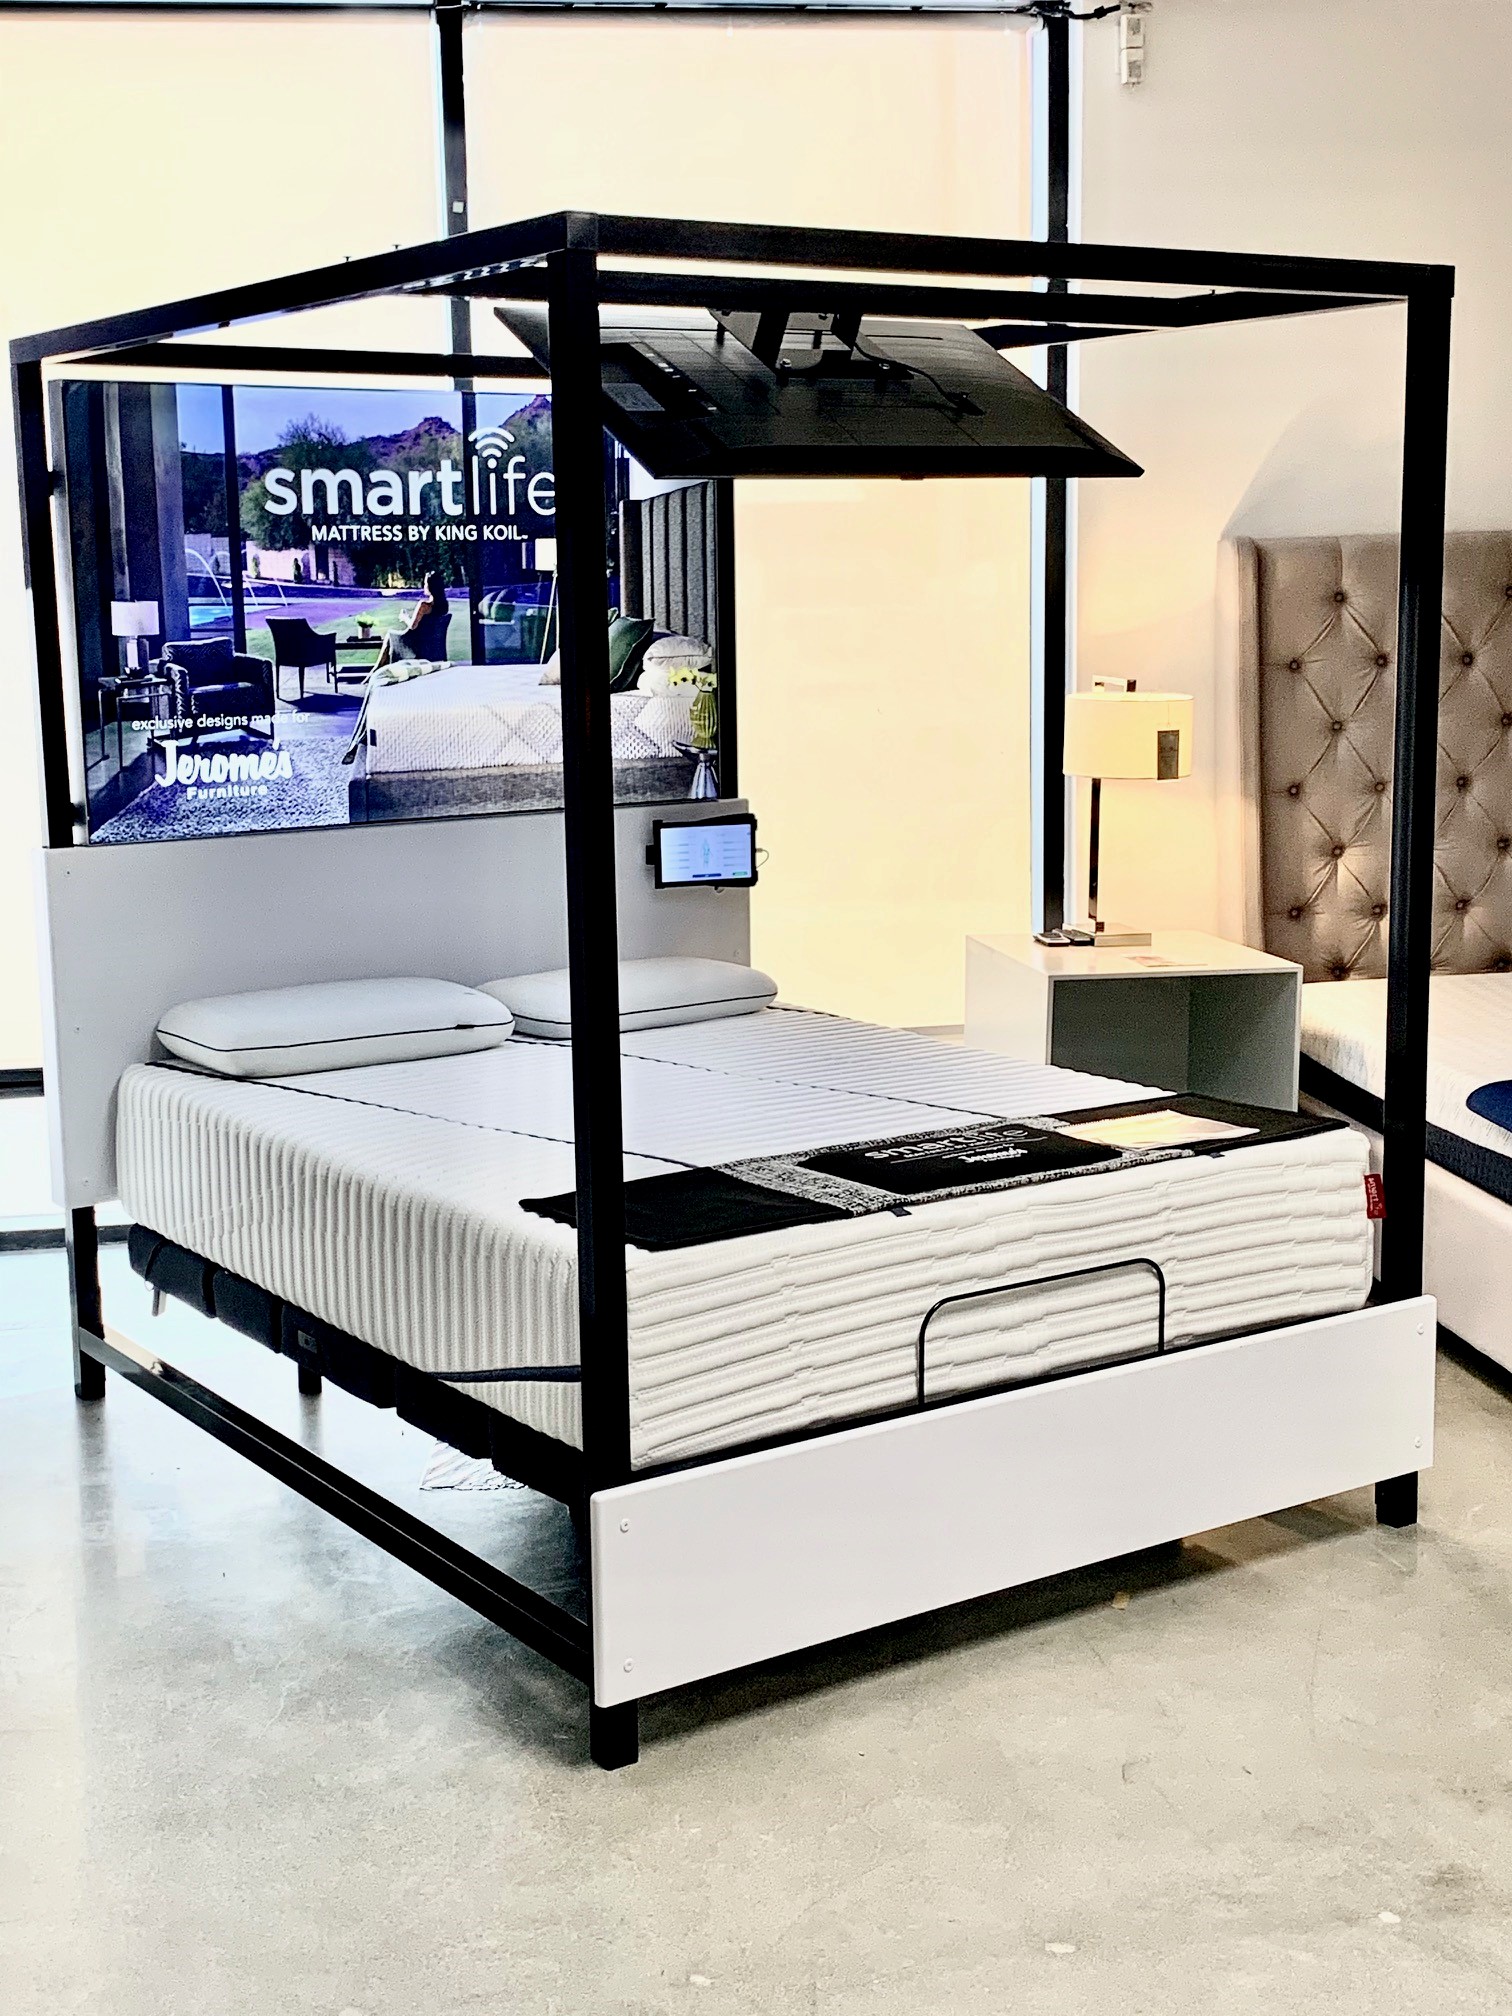 Smartlife Mattress By King Koil Experience Powered by iOBED